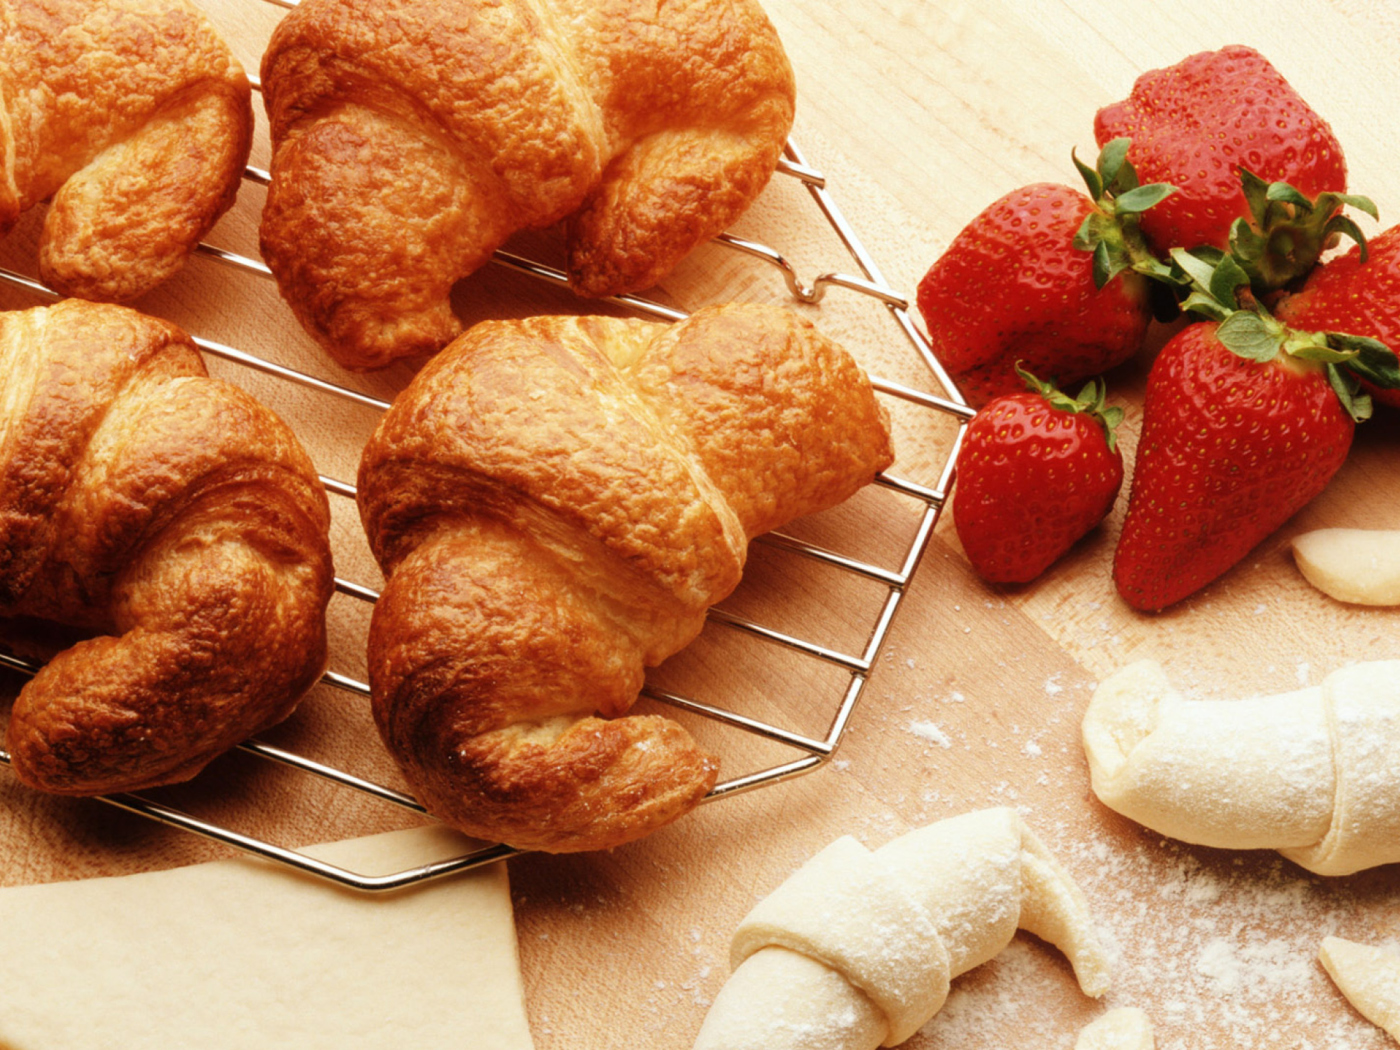 Croissants And Strawberries wallpaper 1400x1050